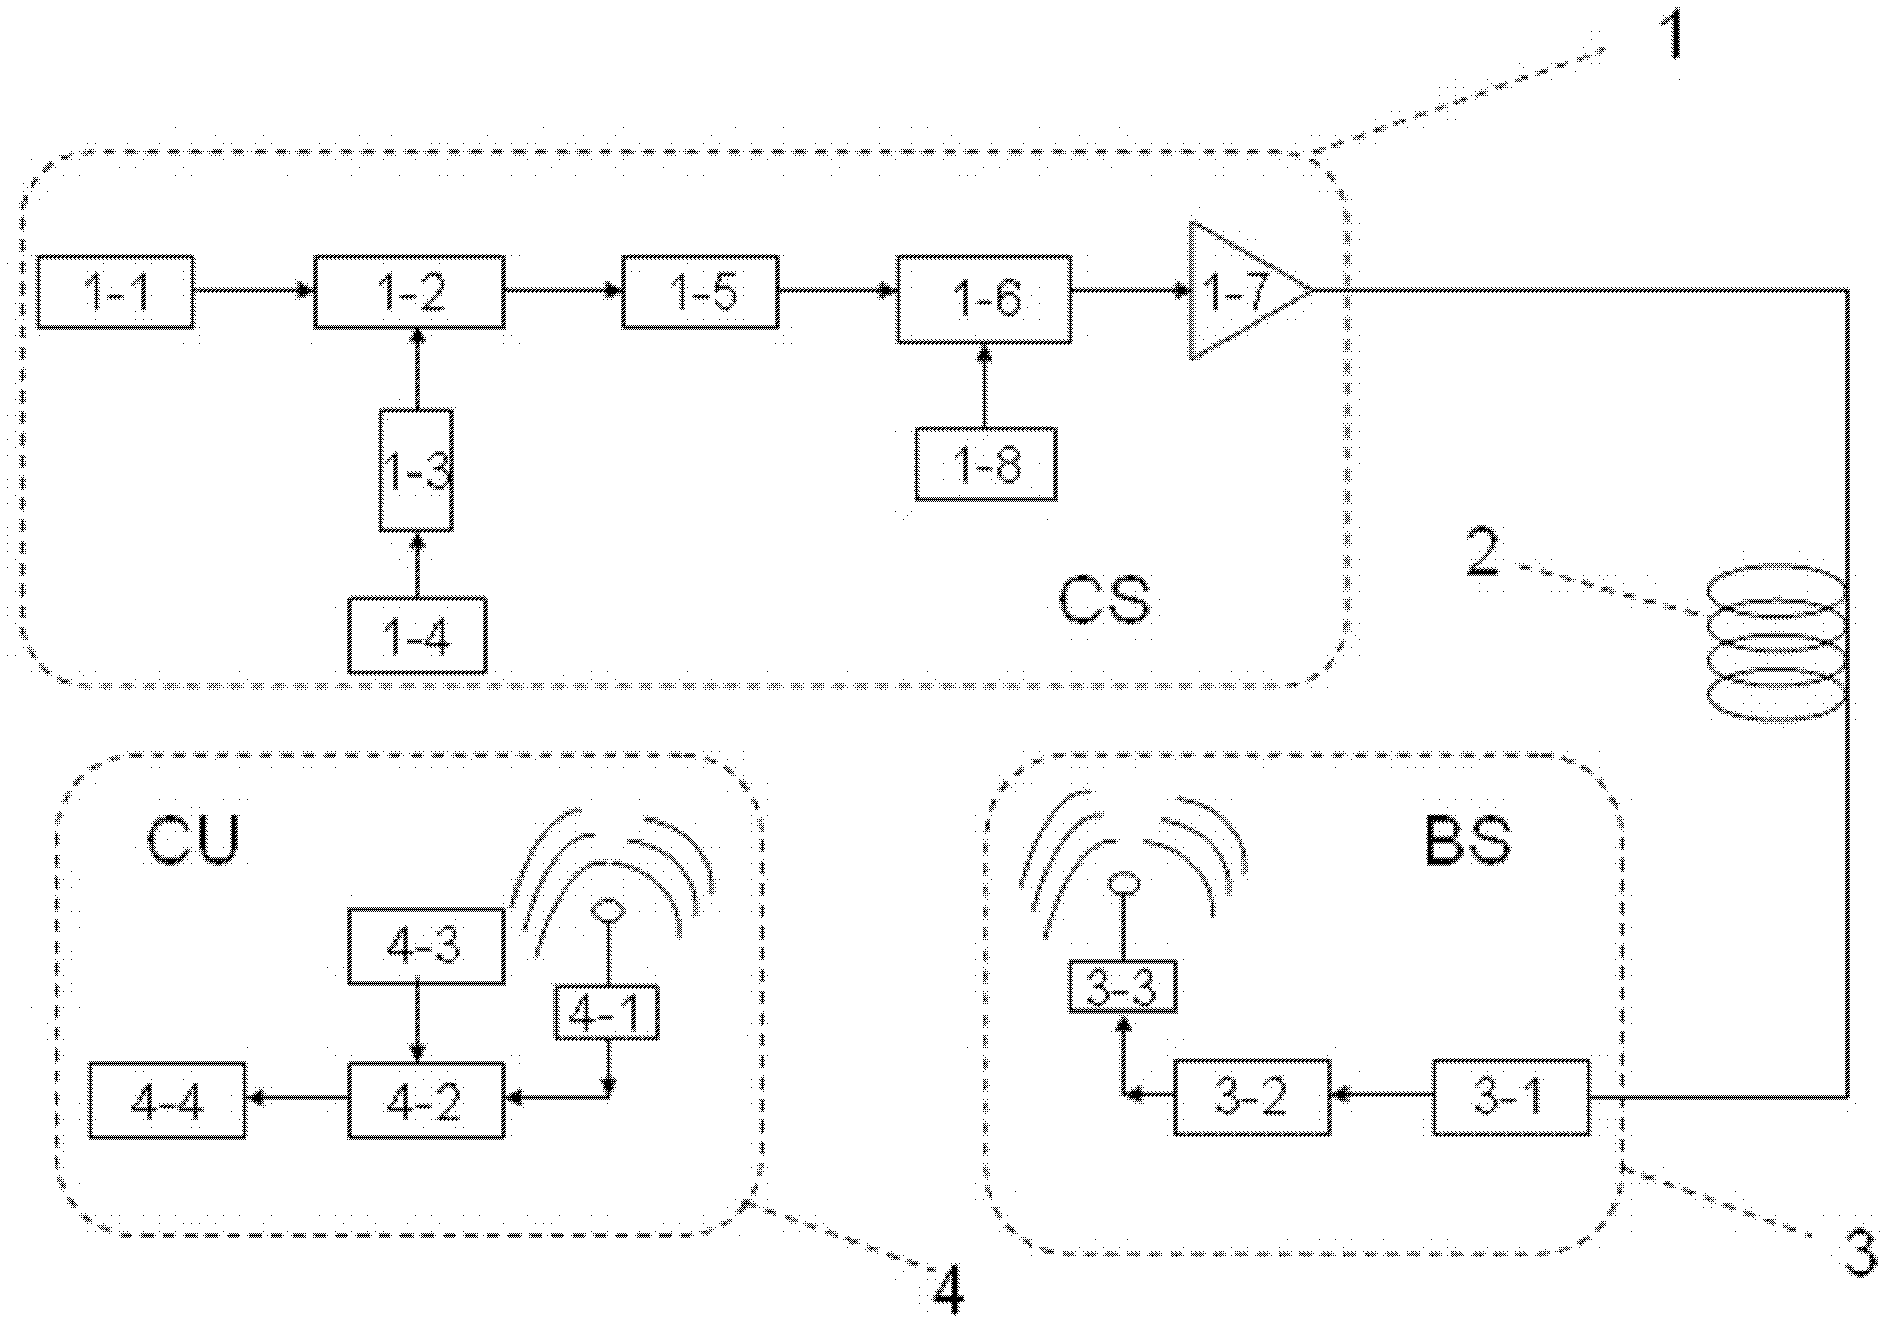 OFDM (Orthogonal Frequency Division Multiplexing)-technique-based TOF (Terahertz-Over-Fiber) wireless communication system device and method